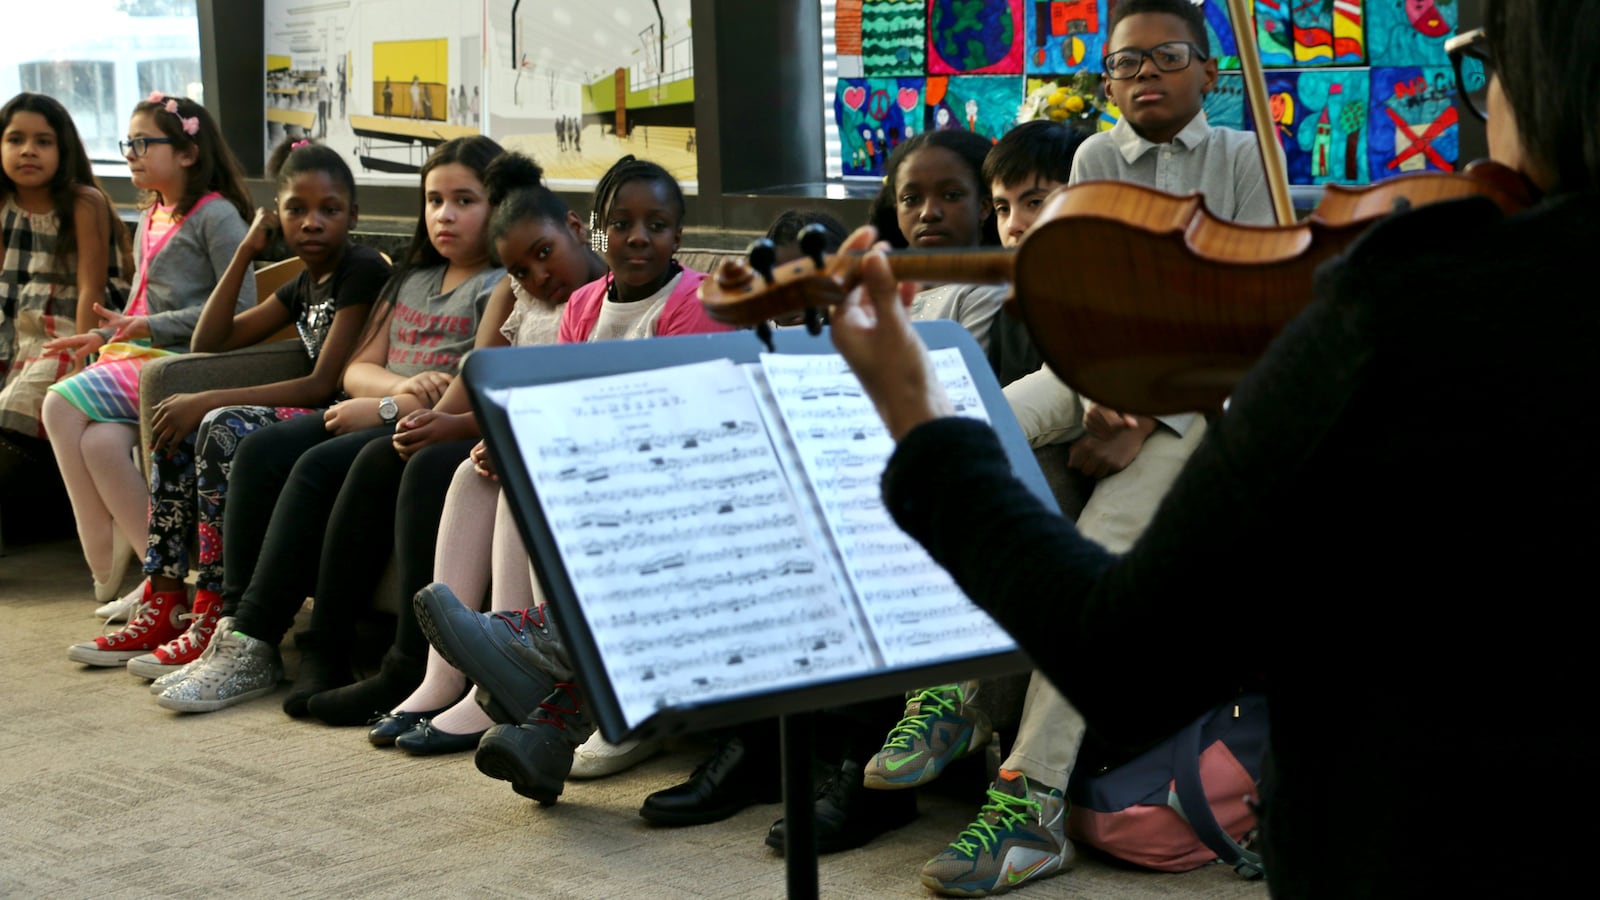 Students listened to their music teacher play violin at a P.S. 191 community event at Lincoln Center this spring. Fernando Taylor, a seventh-grade student who is the son of PTA President Charles Taylor, is seated far right. (Photo: Patrick Wall)